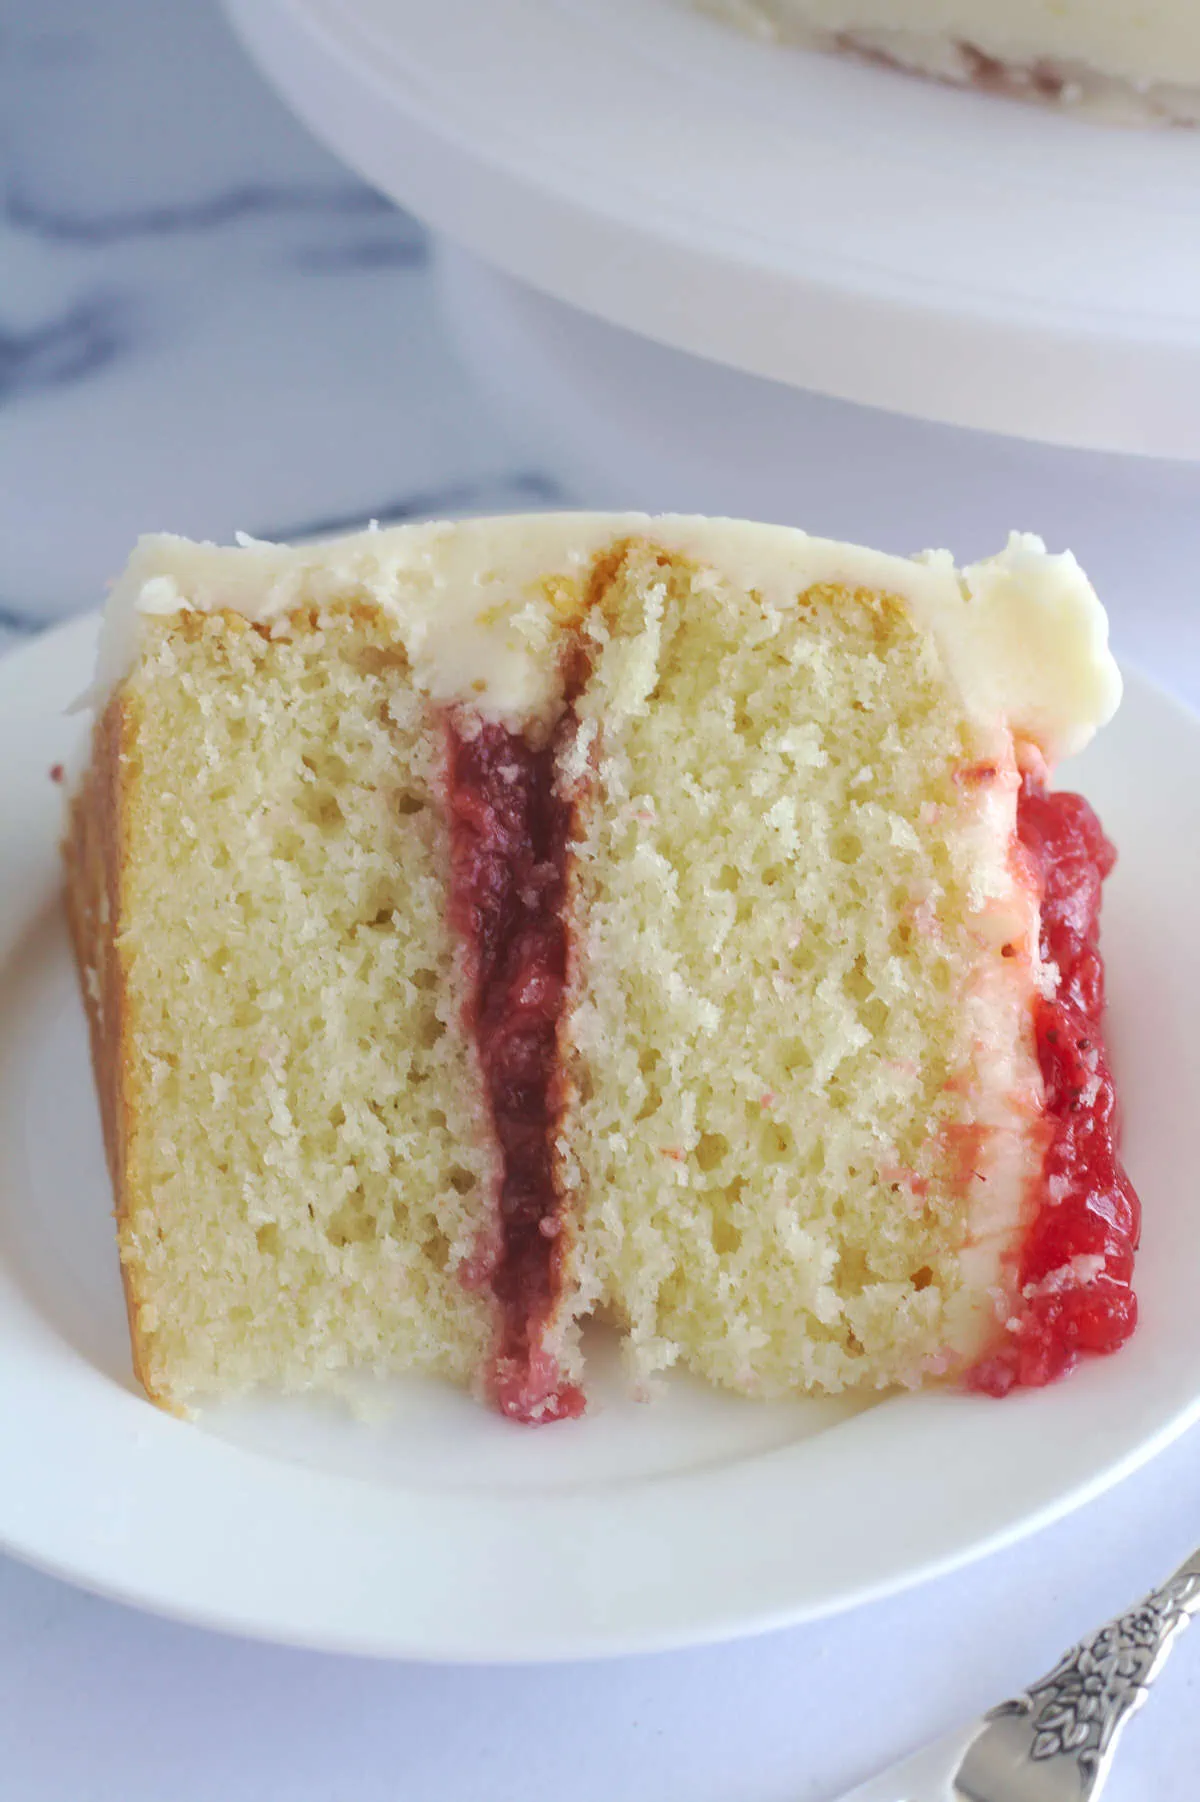 A slice of cake on a white plate. The cake has strawberry filling in the middle of the cake, and on top.